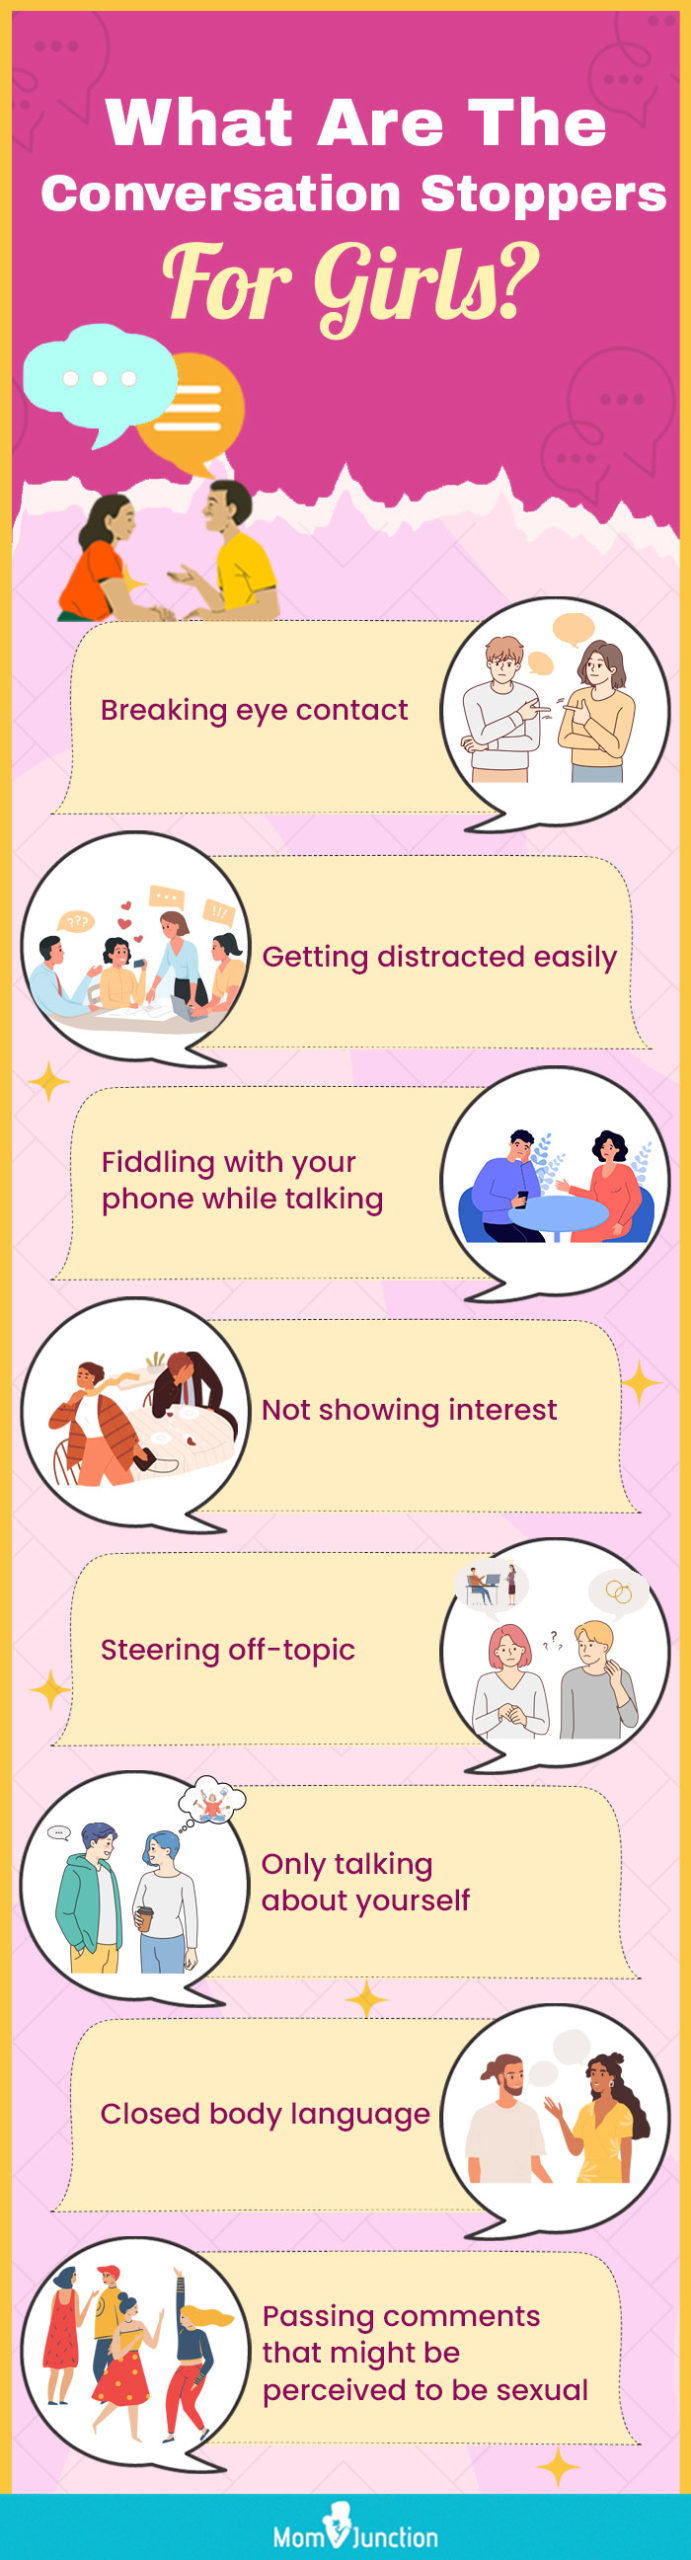 what are the conversation stoppers for girls (infographic)